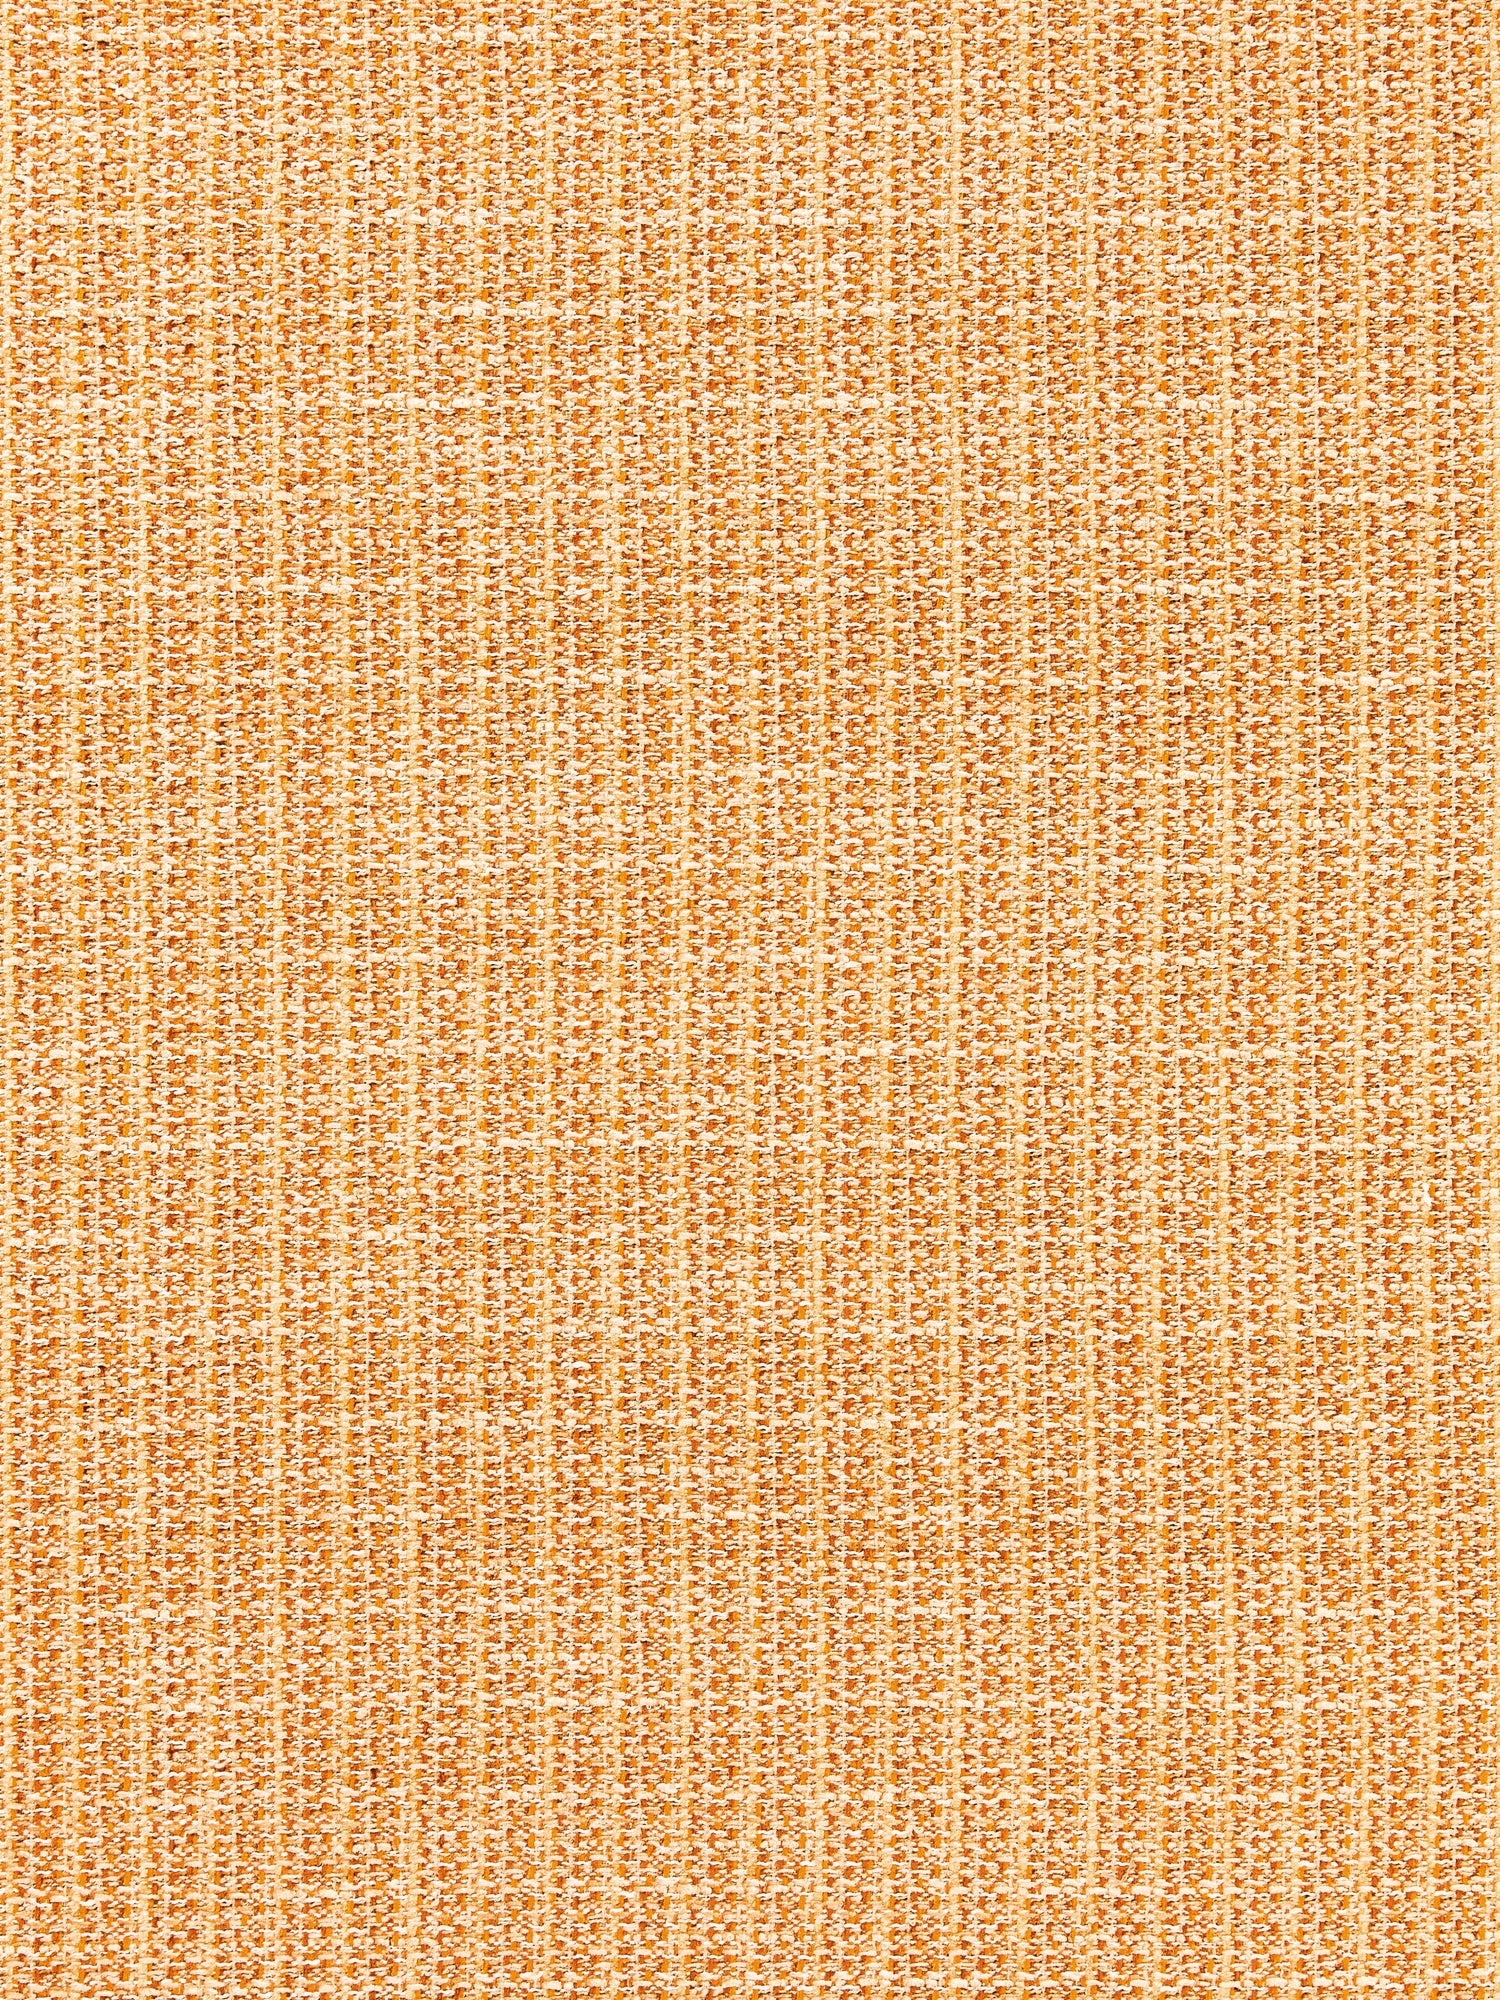 Highland Chenille fabric in sunset color - pattern number SC 000327257 - by Scalamandre in the Scalamandre Fabrics Book 1 collection